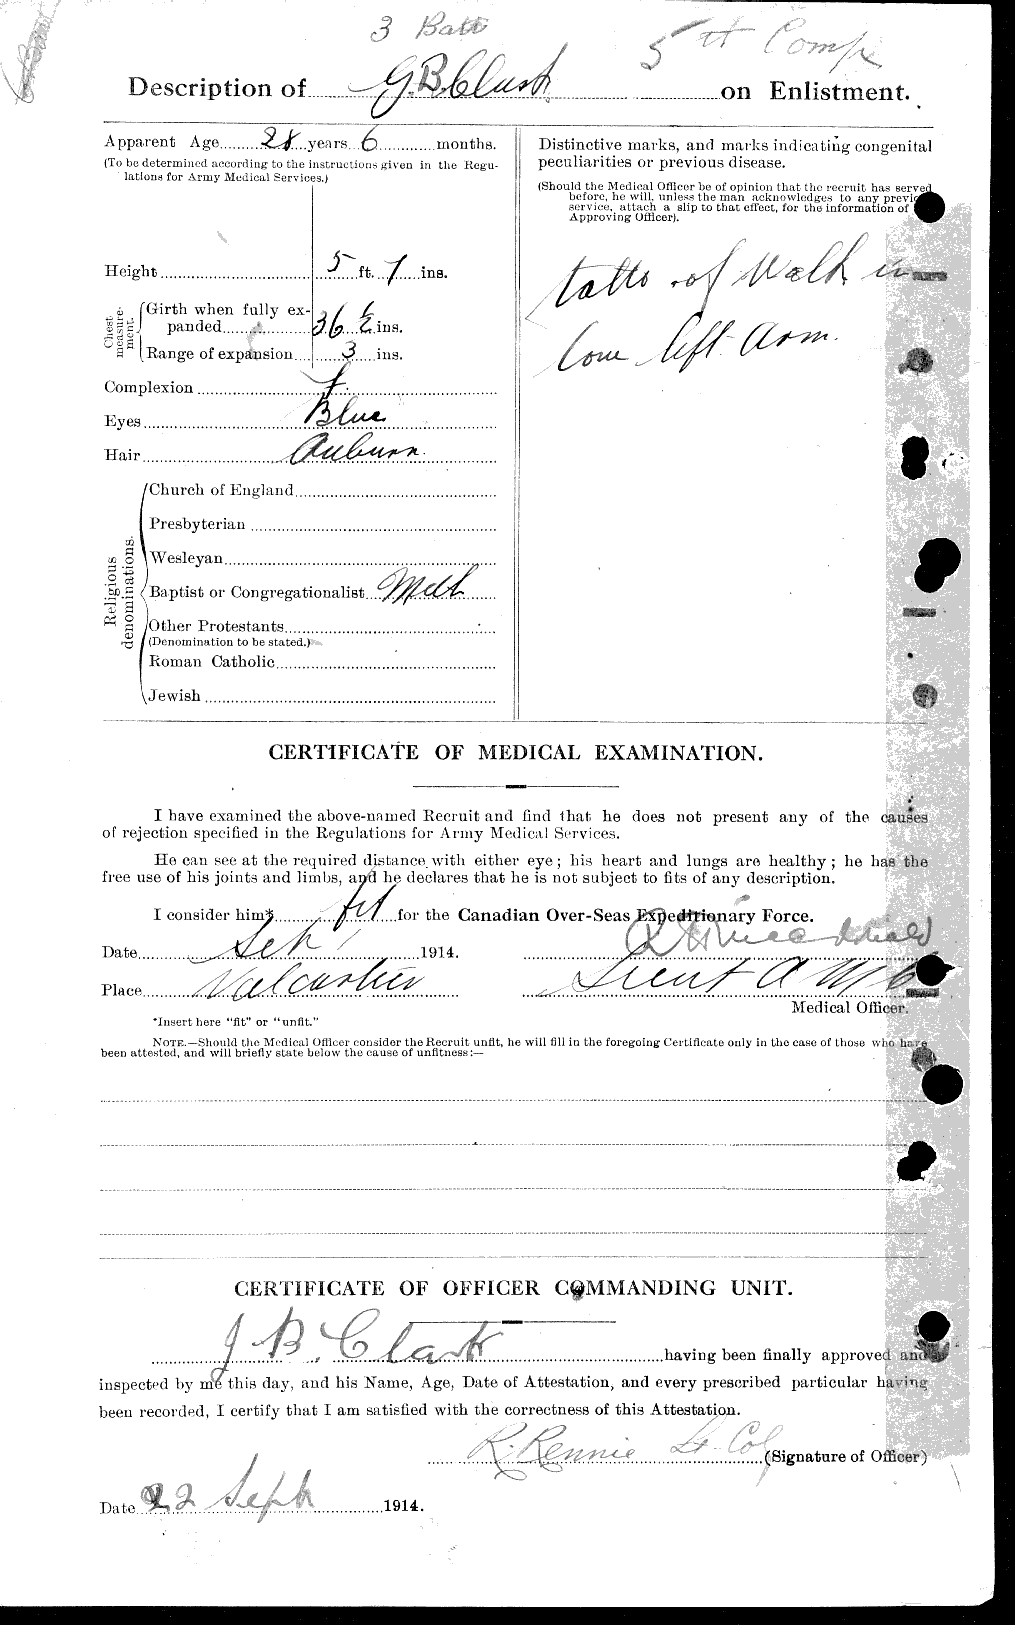 Personnel Records of the First World War - CEF 023178b